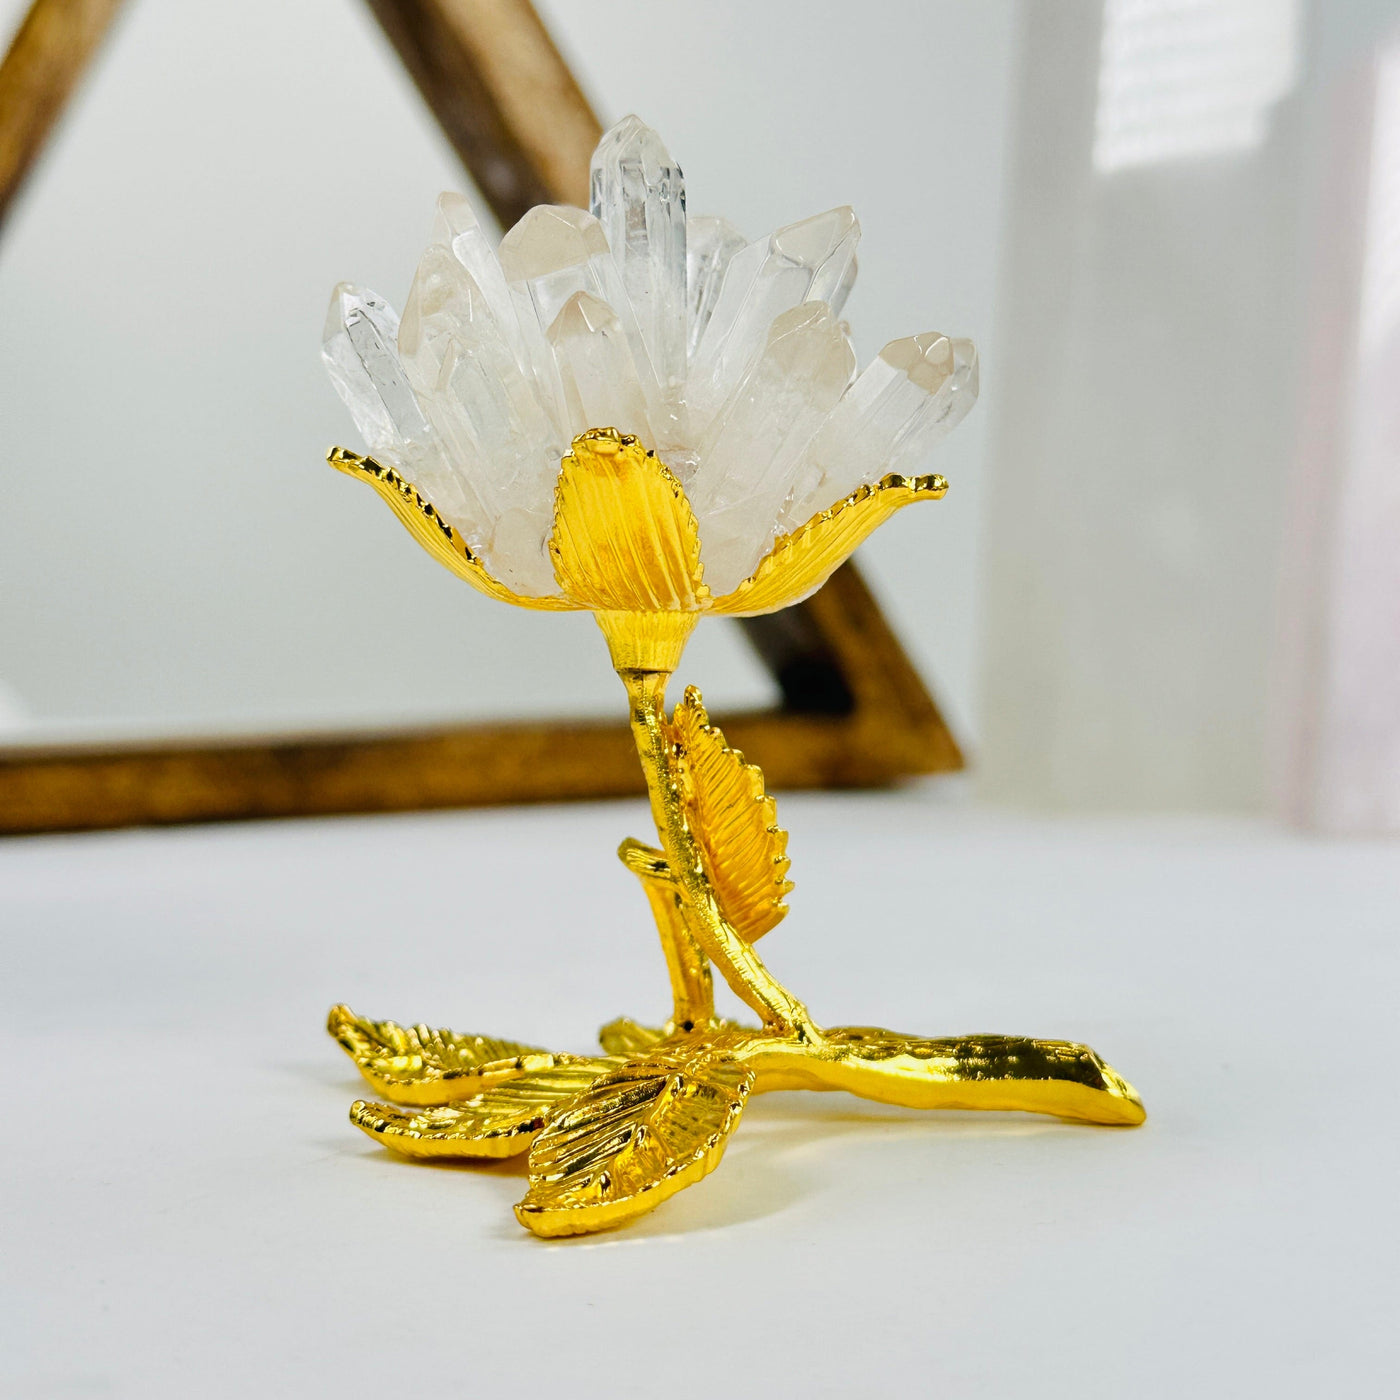 crystal quartz point rose with decorations in the background